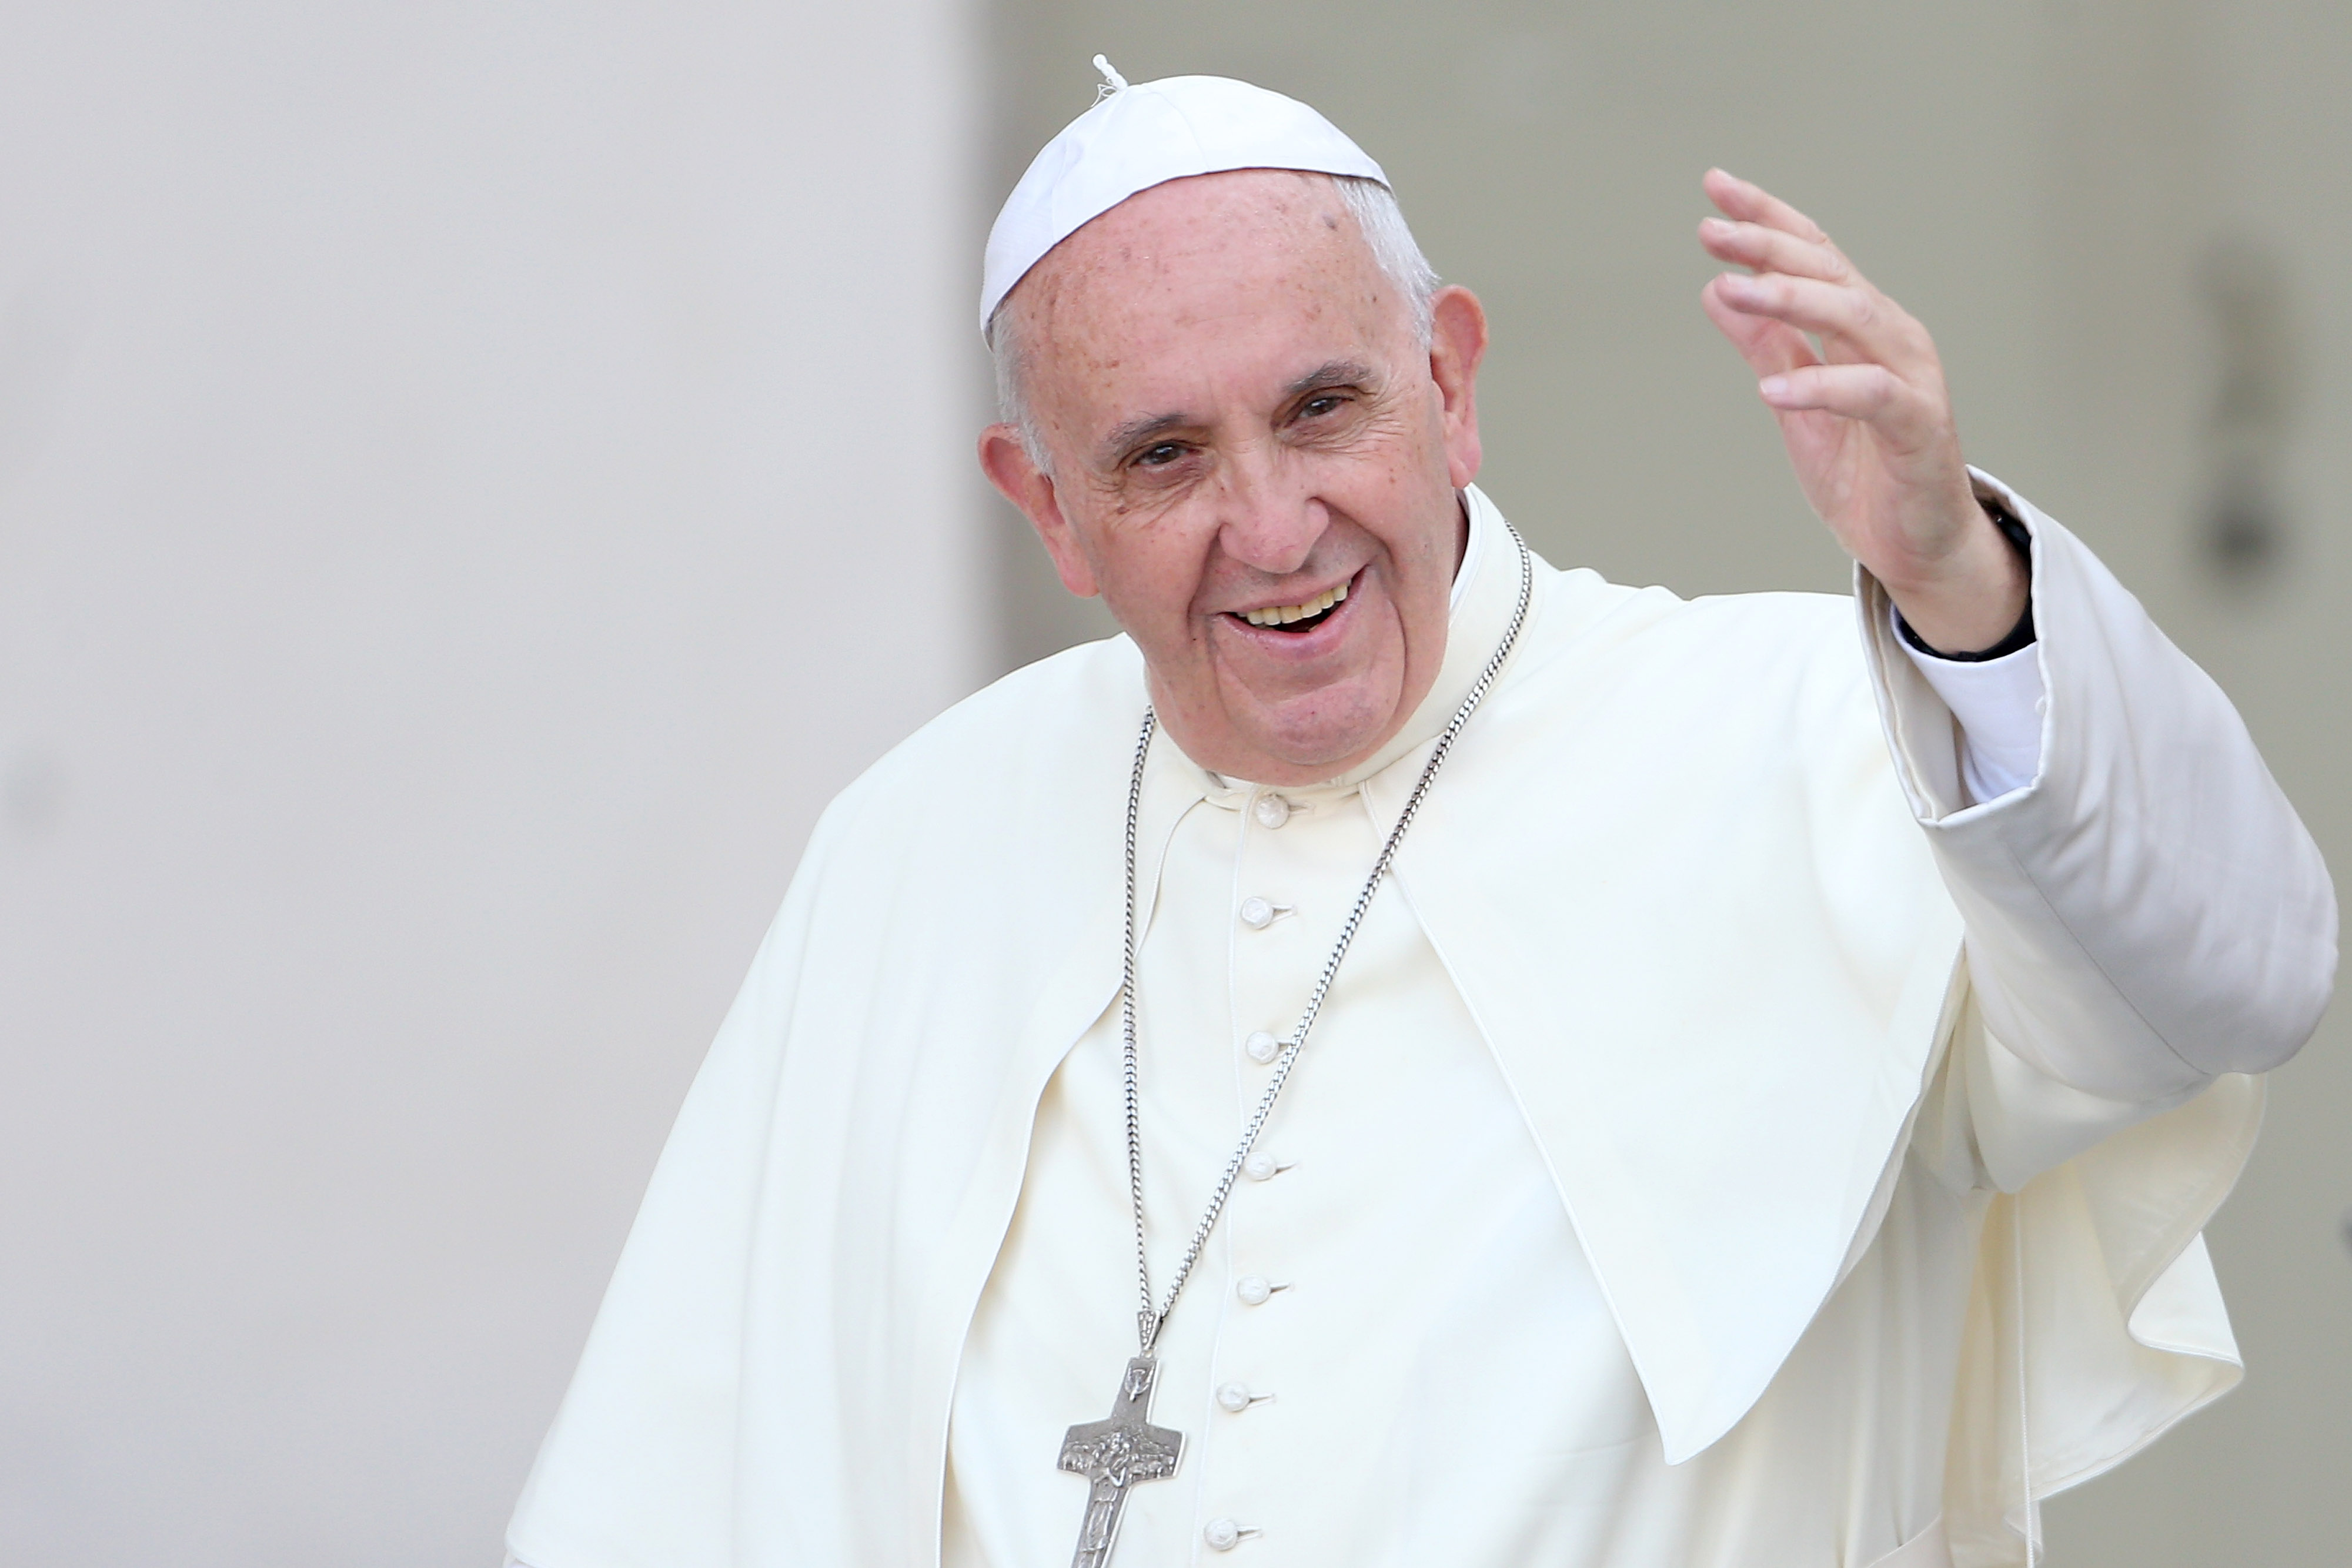 Pope Francis waves to the faithful as he arrives in St. Peter's Square for a meeting with the Roman Diocesans on June 14, 2015 in Vatican City, Vatican. (Franco Origlia—Getty Images)